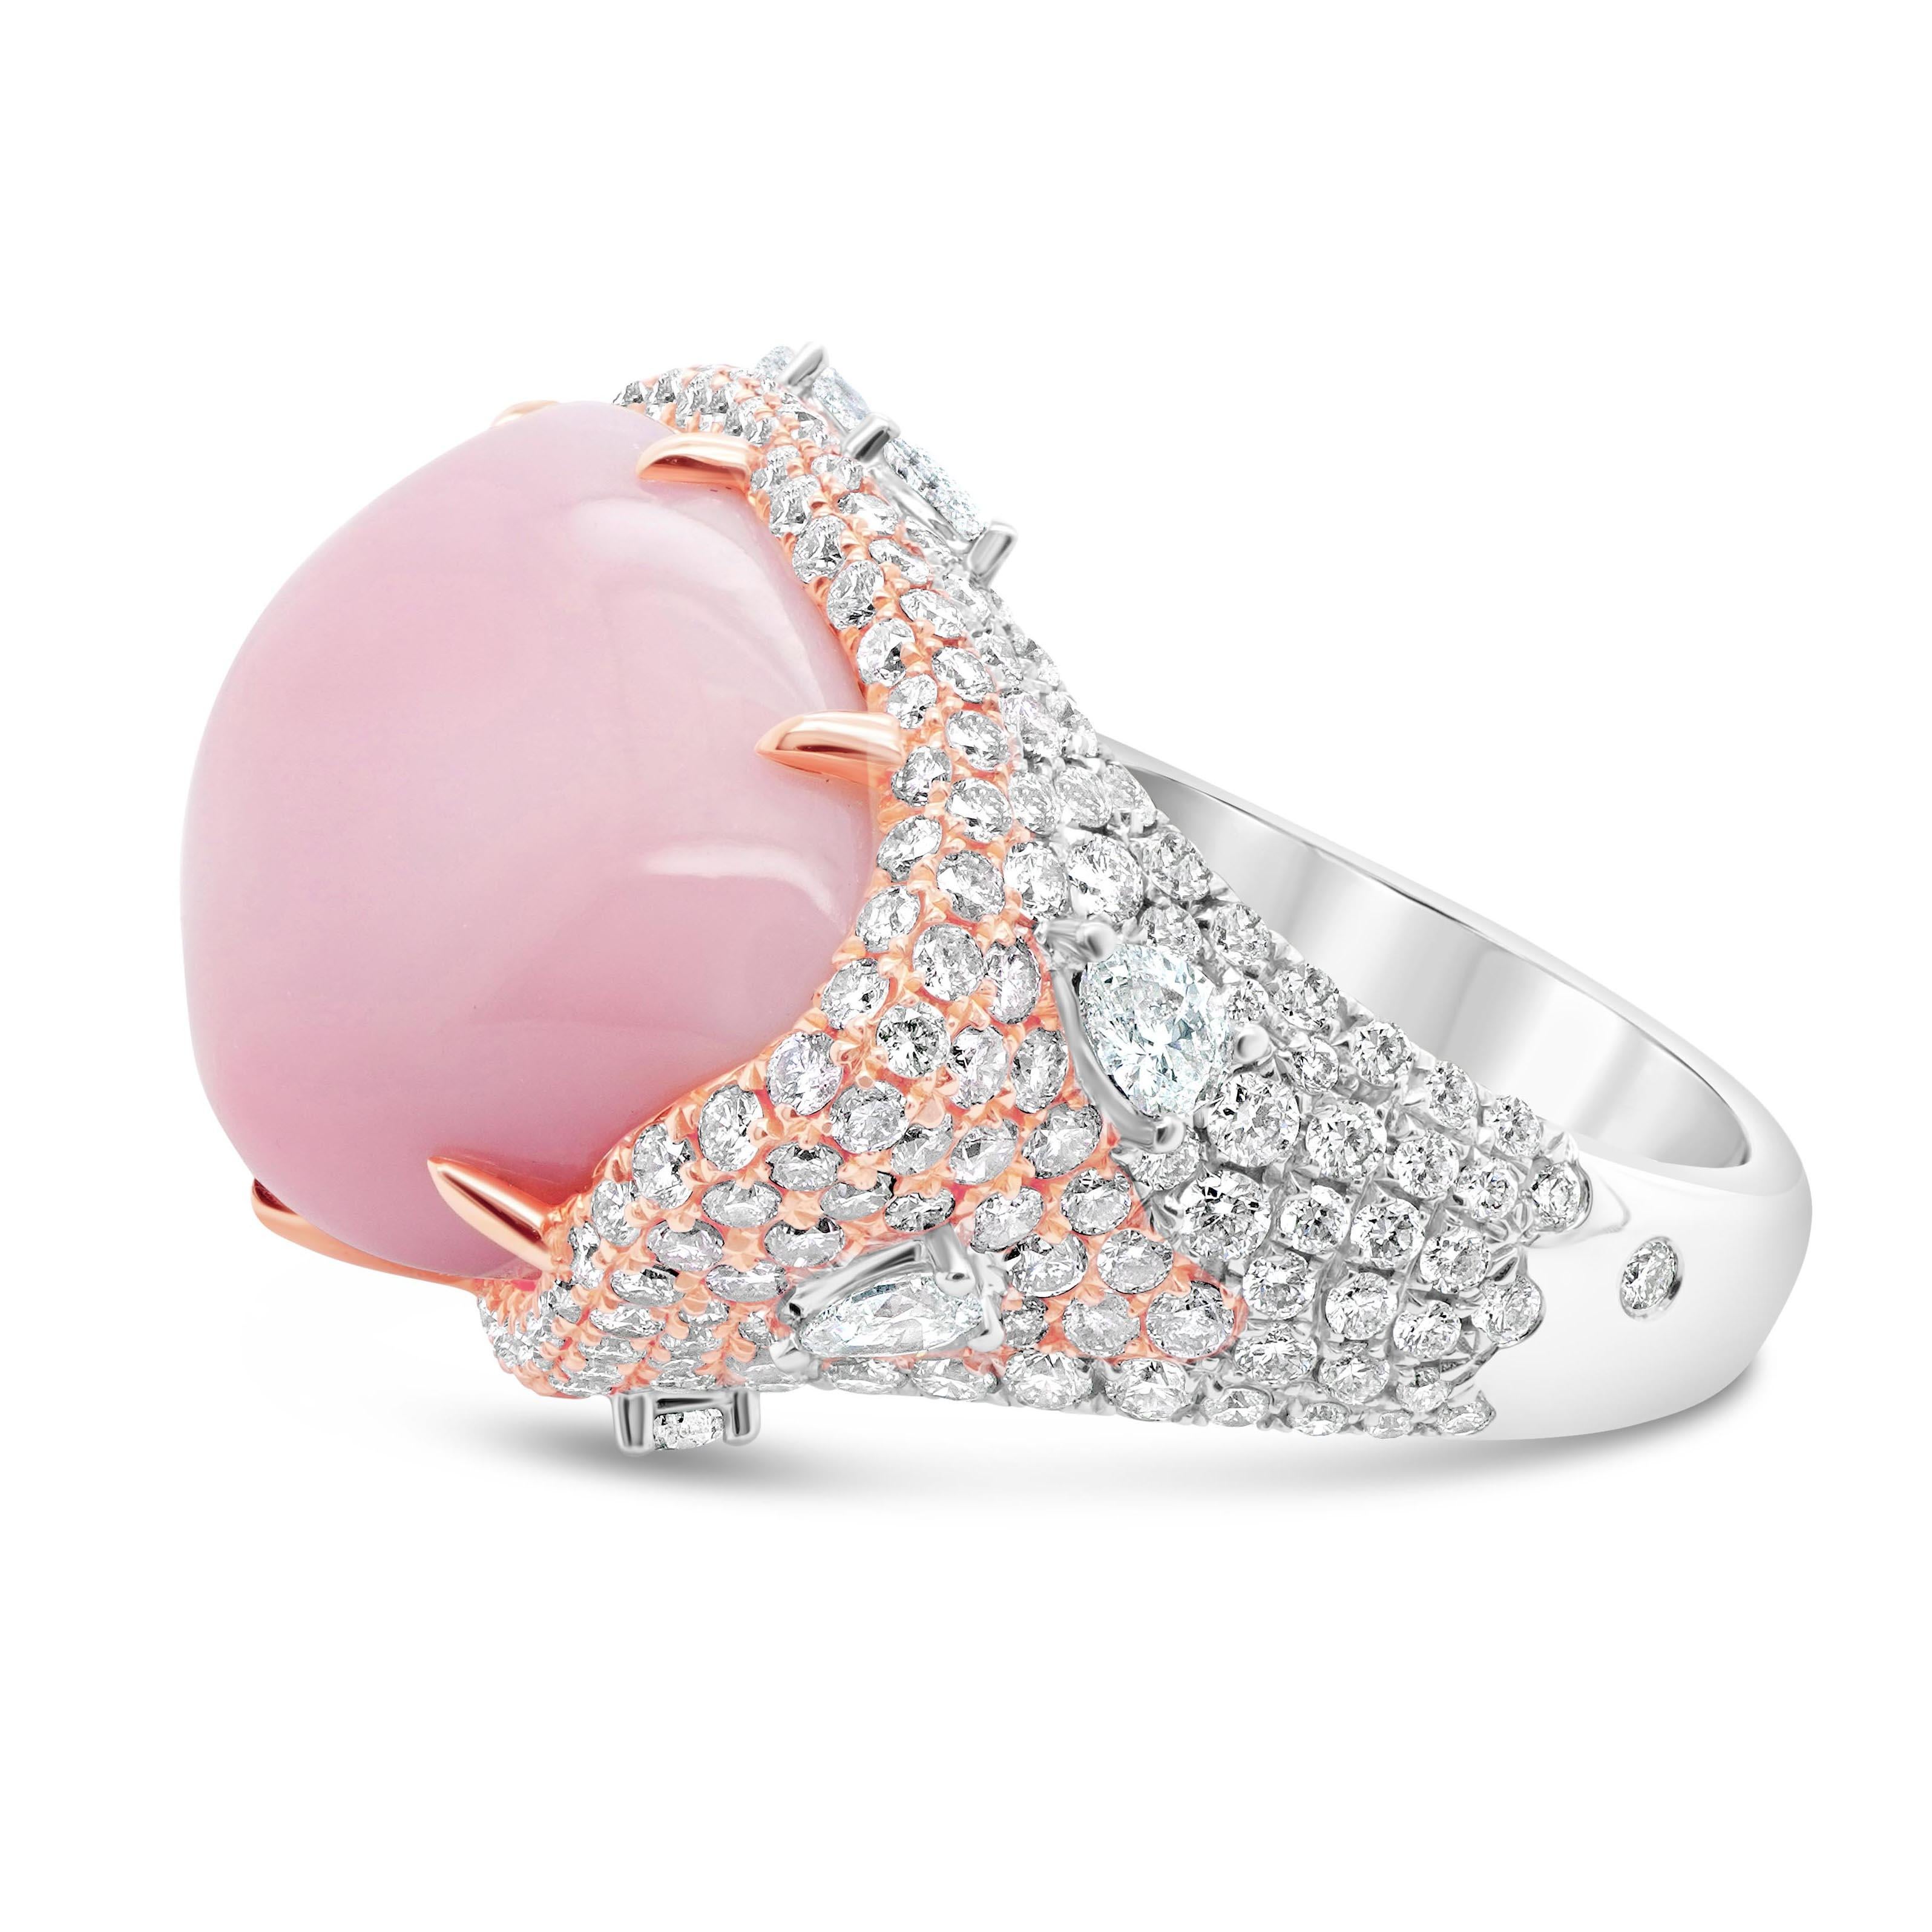 A rare 20.82 carat Caribbean conch pearl is set along with 1.19 carat of Fancy Pink Diamond and 1.31 carat of white brilliant round diamond. The ring is made in 18K and the total gram weight is 15.20 grams. Pretty and pastel-hued, a conch pearl is a